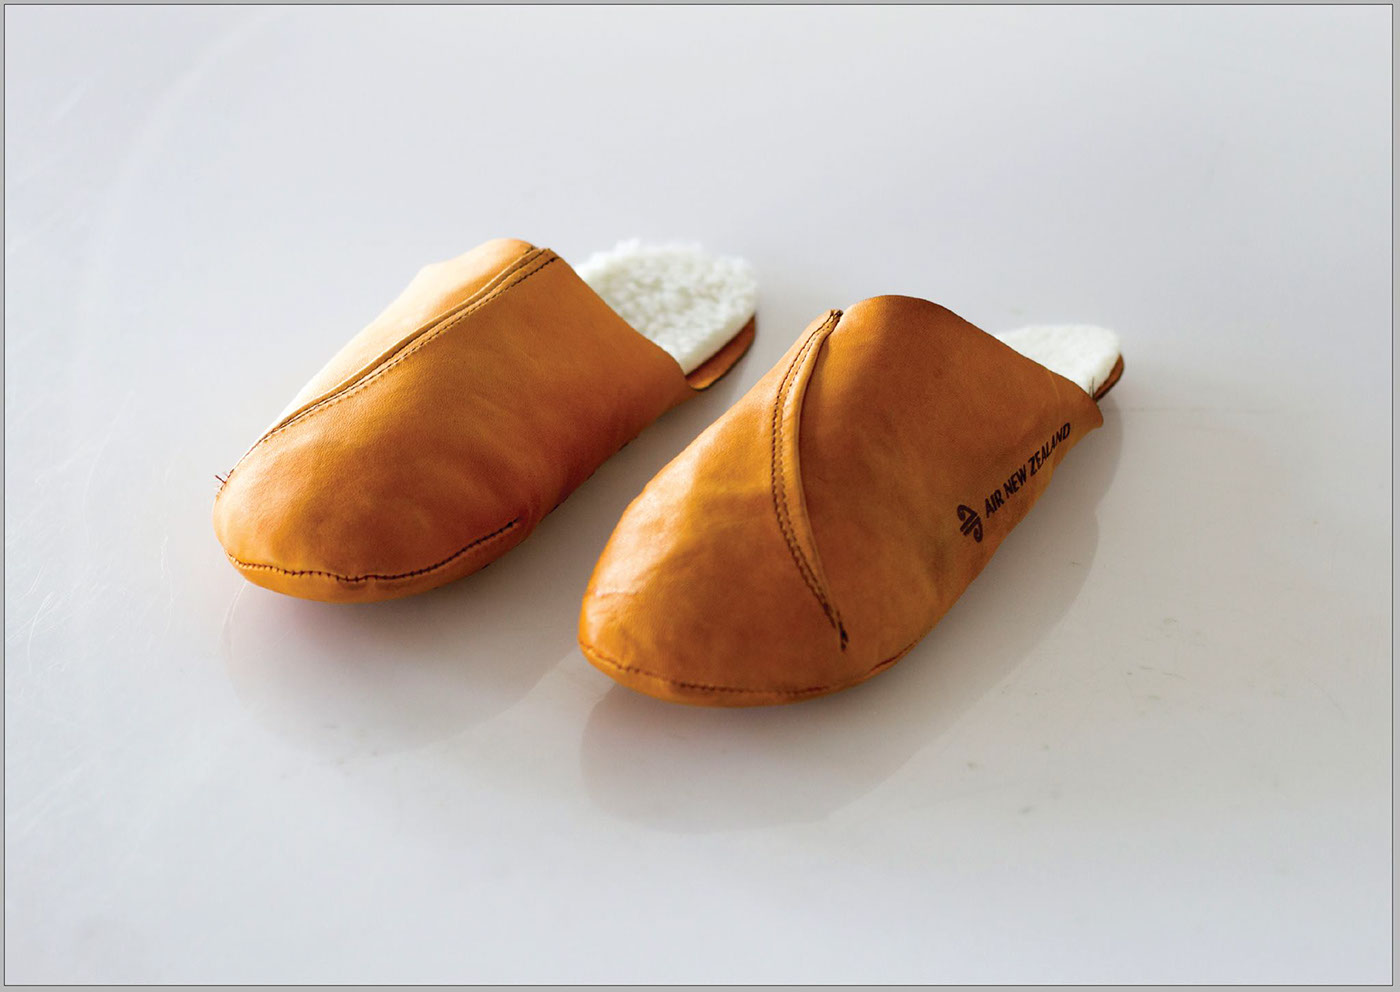 leather footwear product luxury material